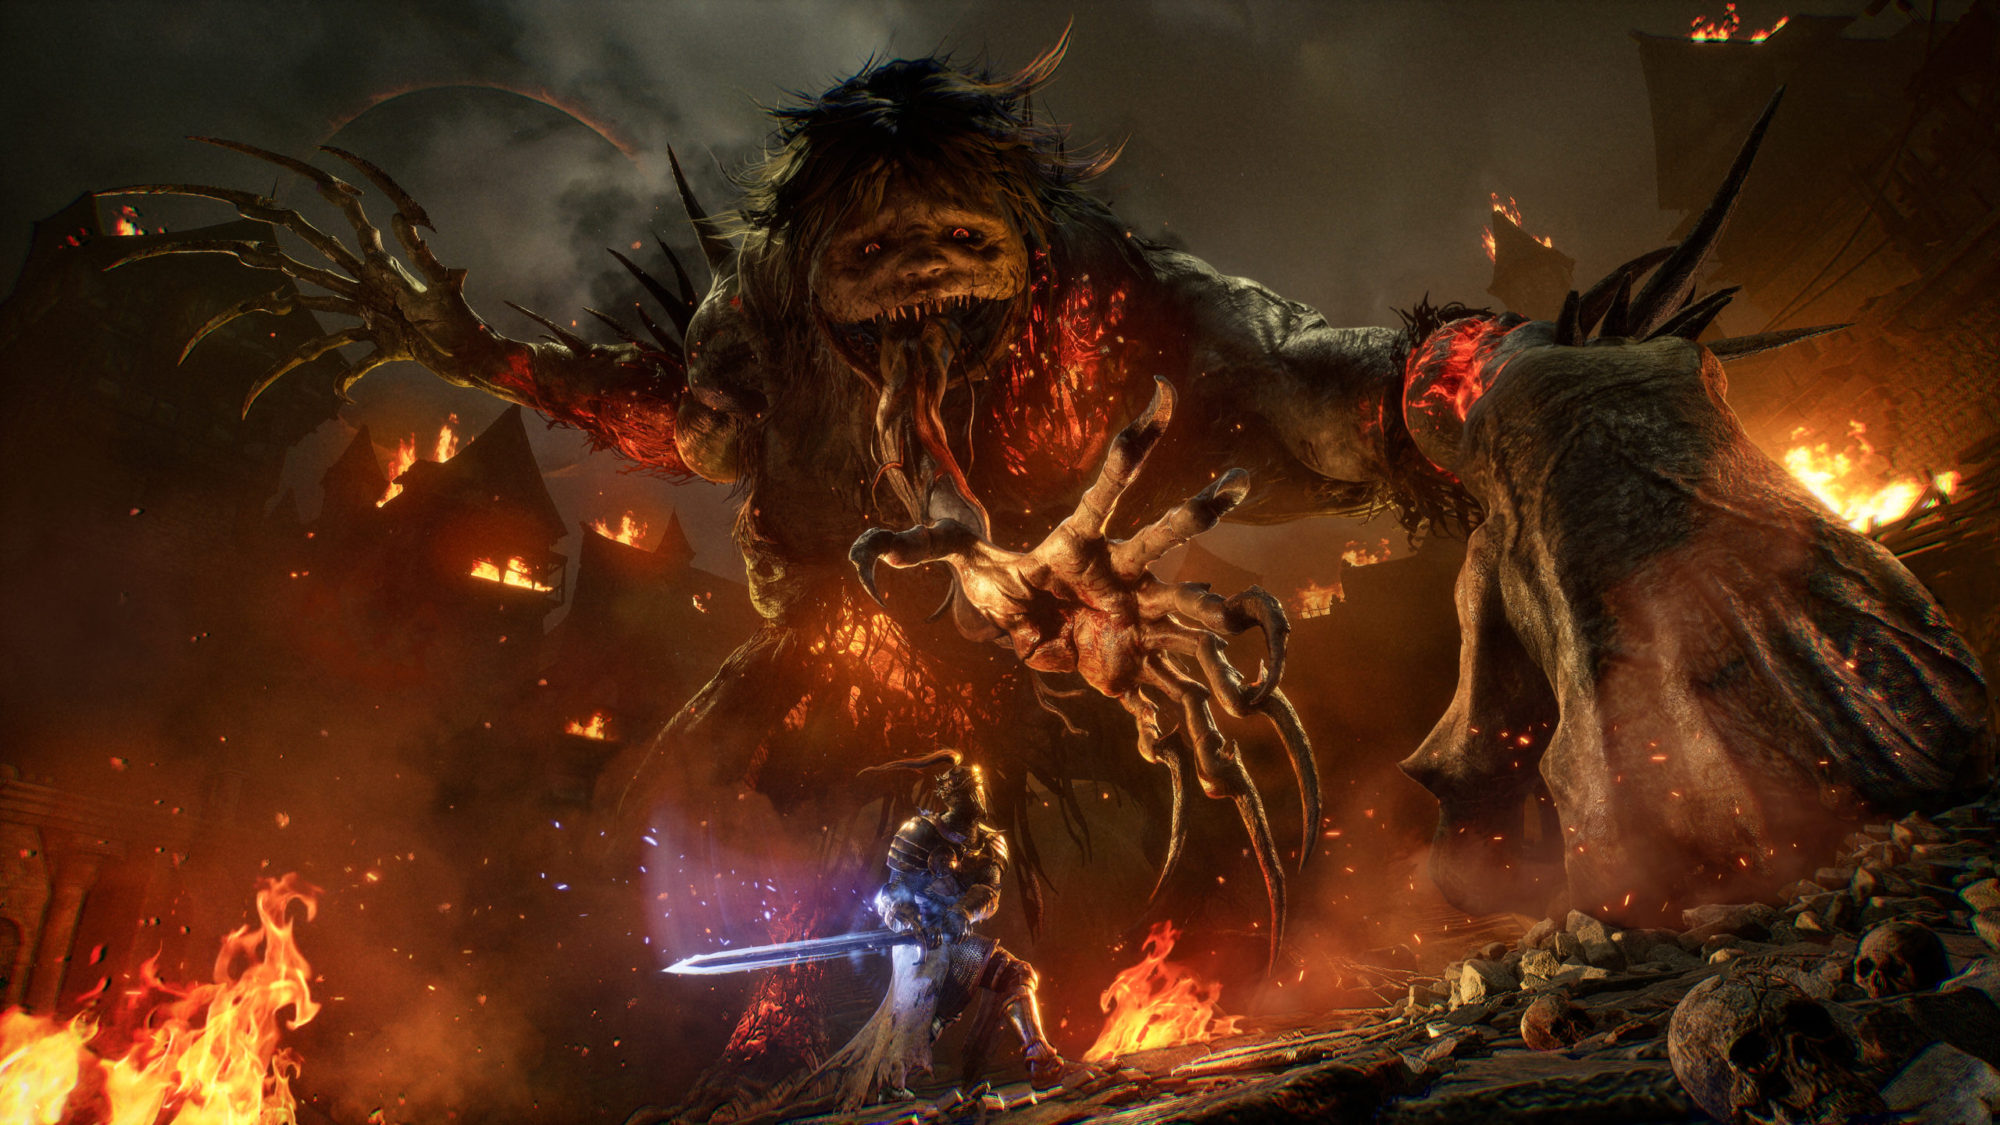 Lords of the Fallen' Gamescom Report - How the Dark Fantasy Game